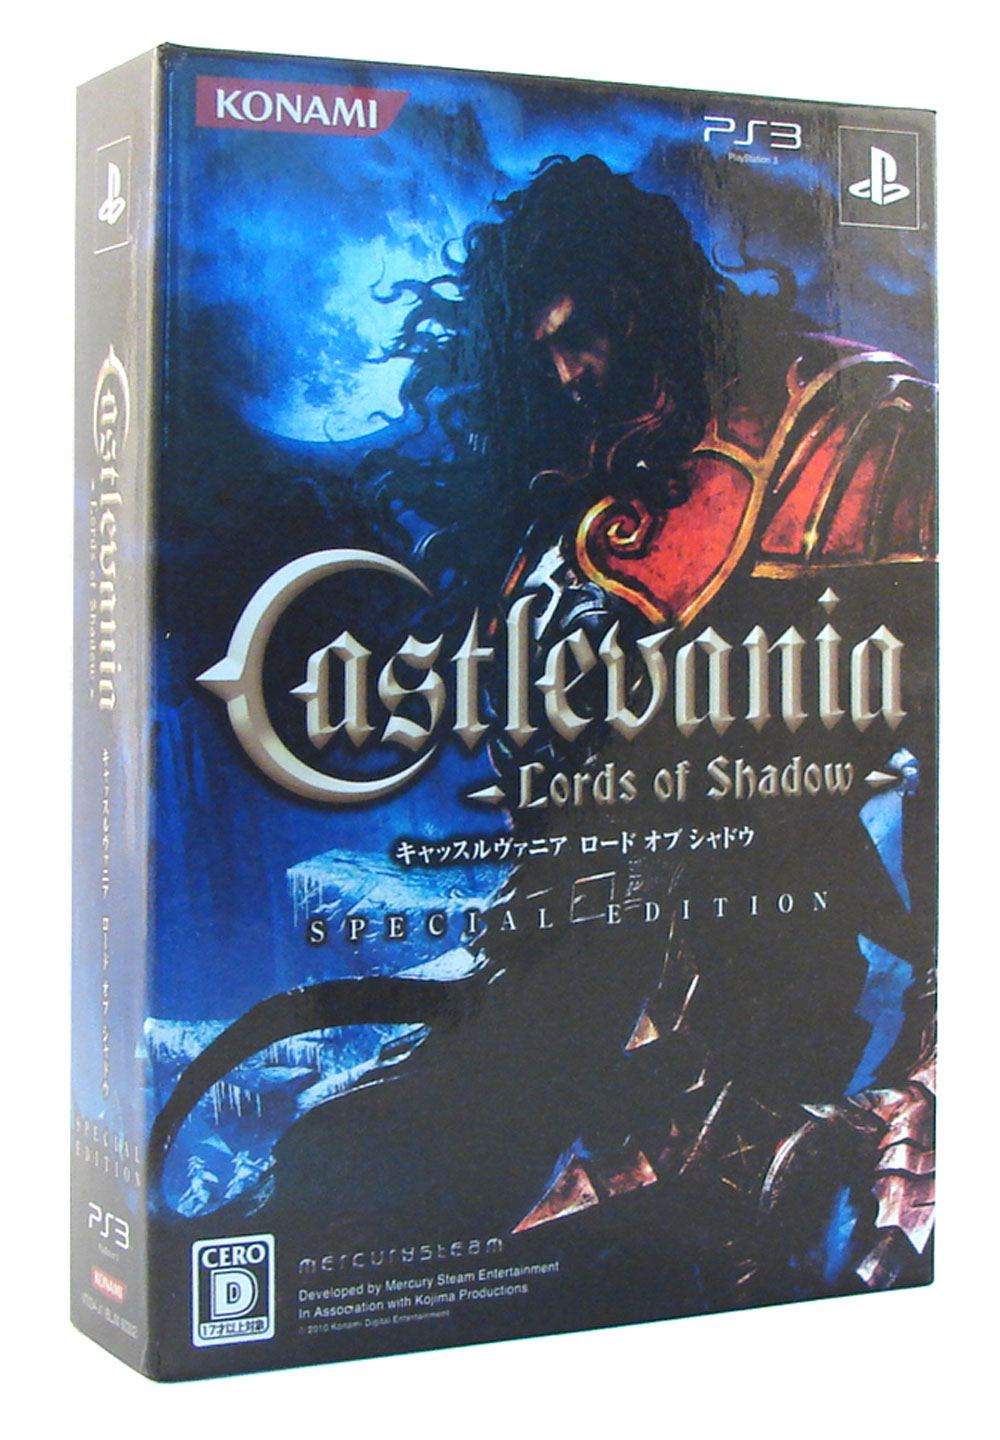 Castlevania: Lords of Shadow - PS3